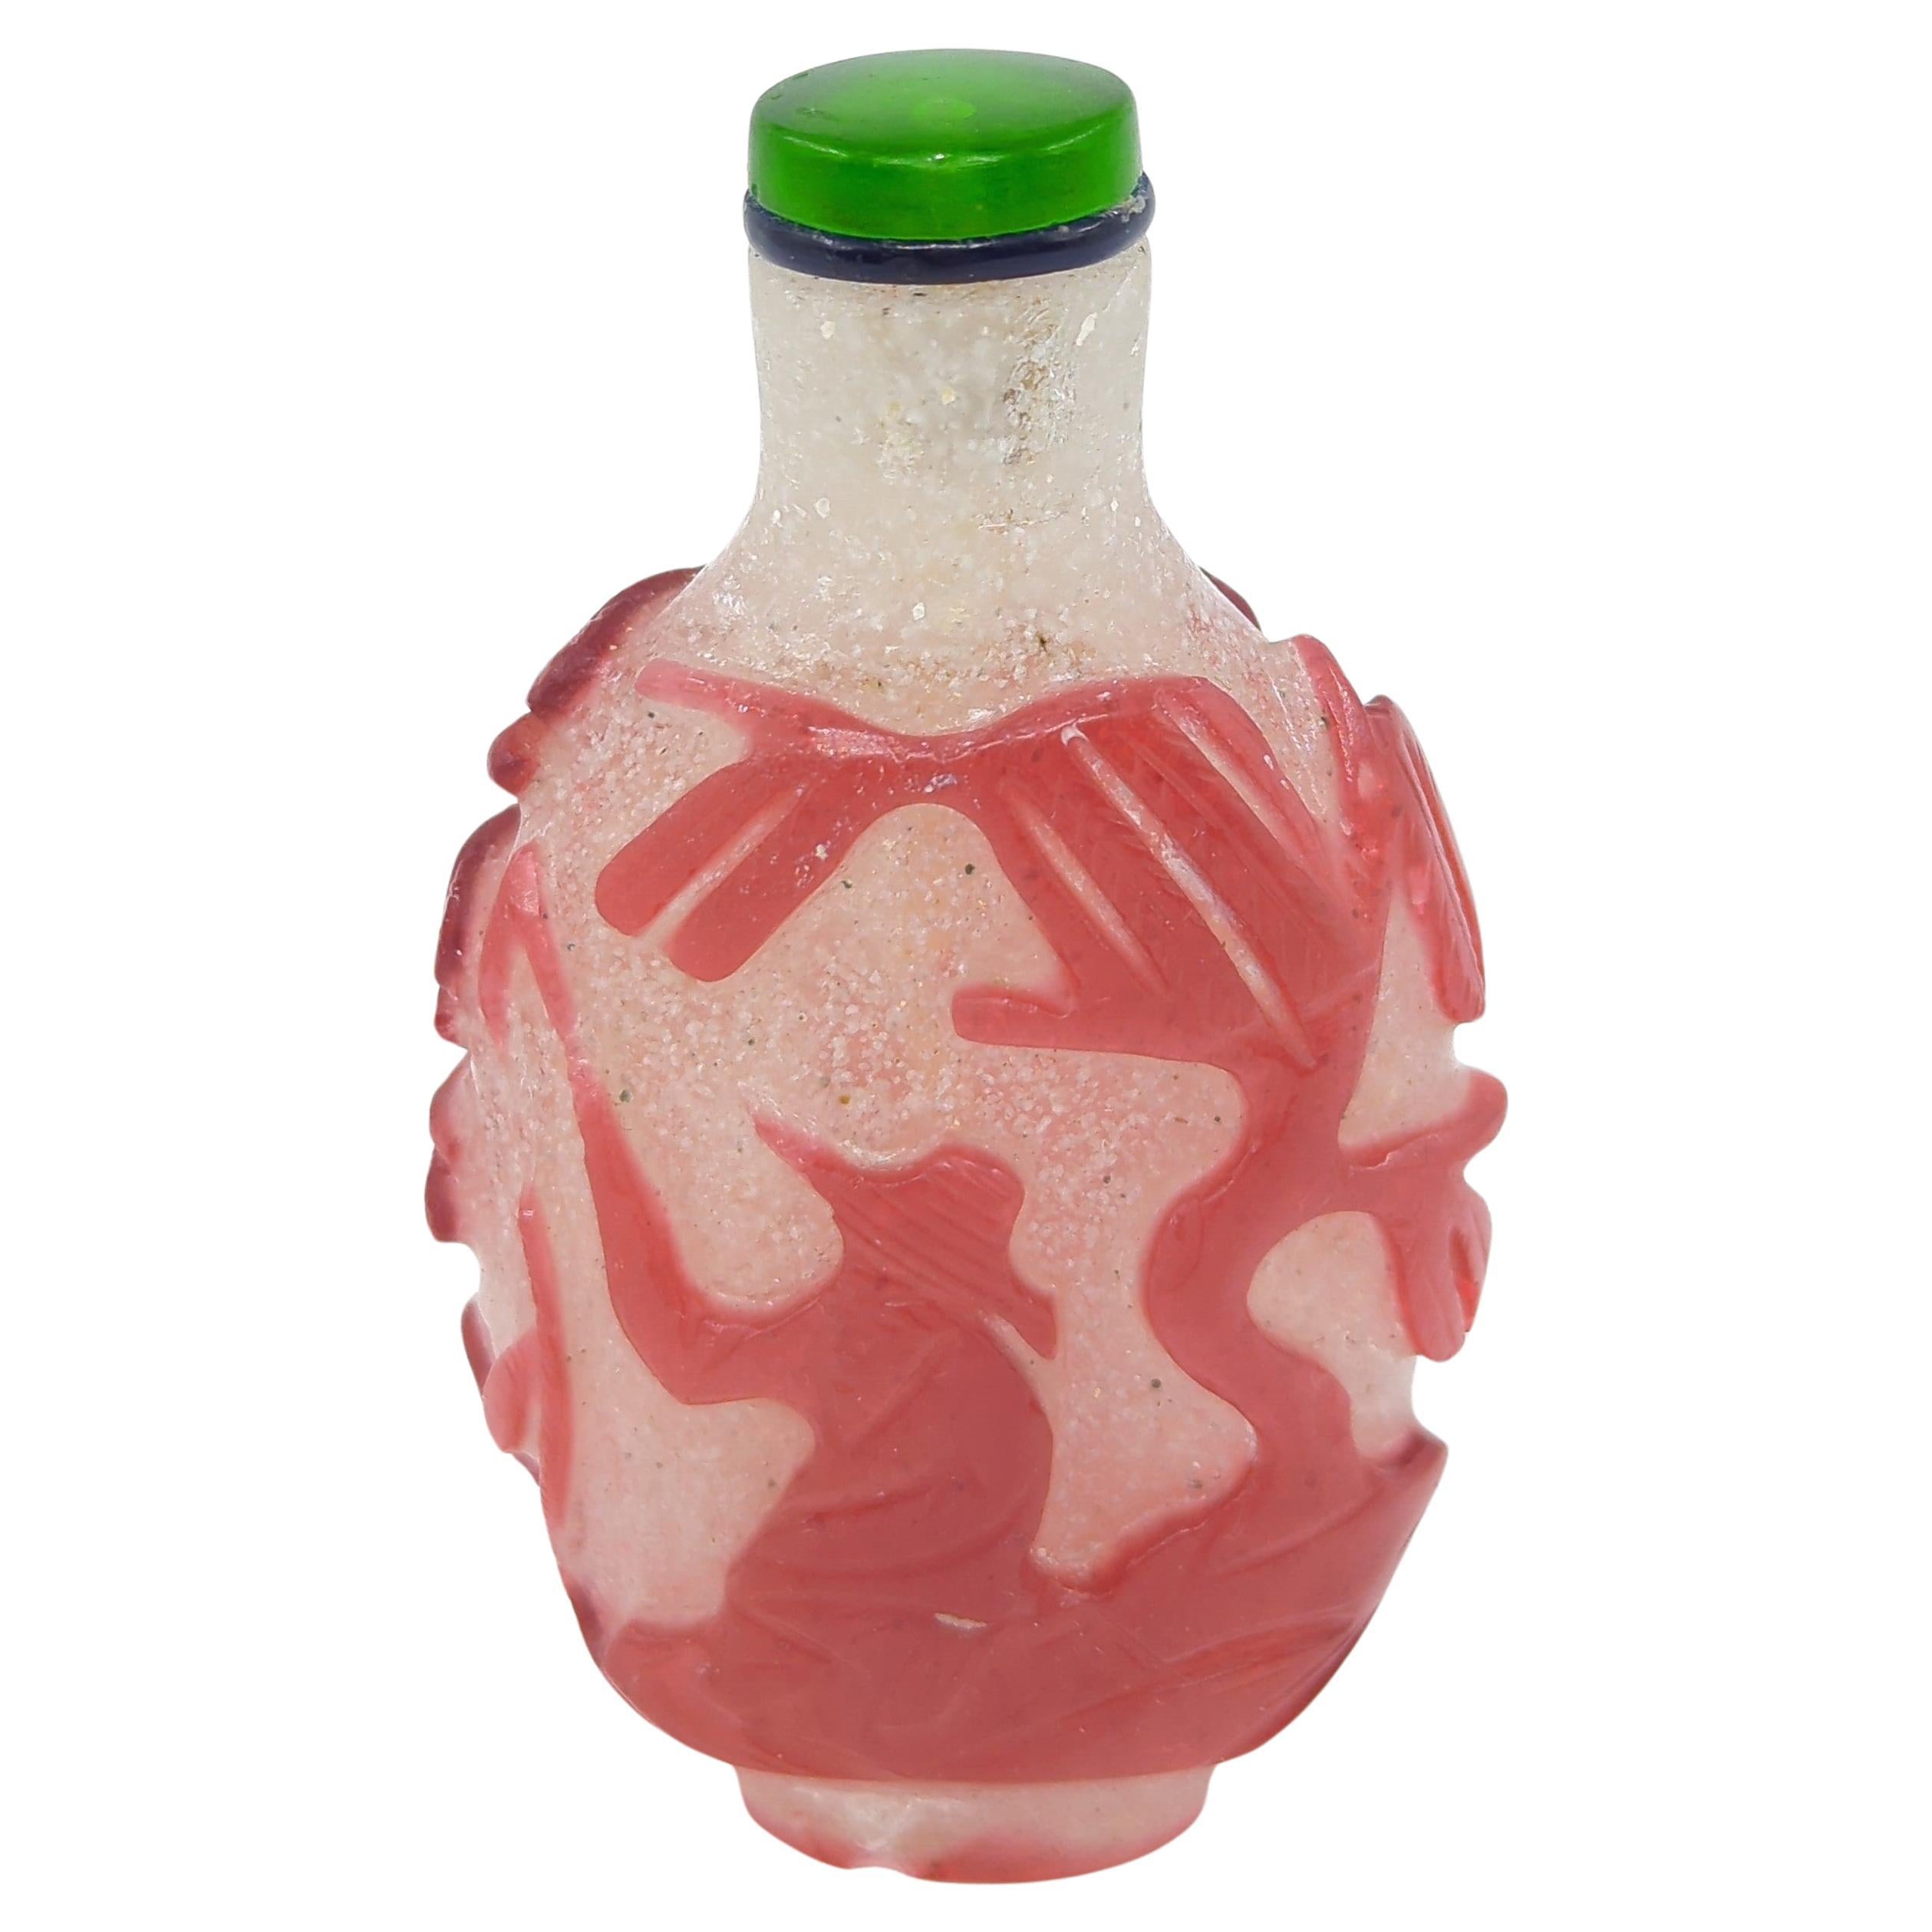 Antique Late Qing to Republic period ruby red glass overlay snuff bottle on snow storm ground, depicting a landscape scene with a wood gatherer figure to one side, and a fisherman figure to the other side.

The scenes of a fisherman and wood